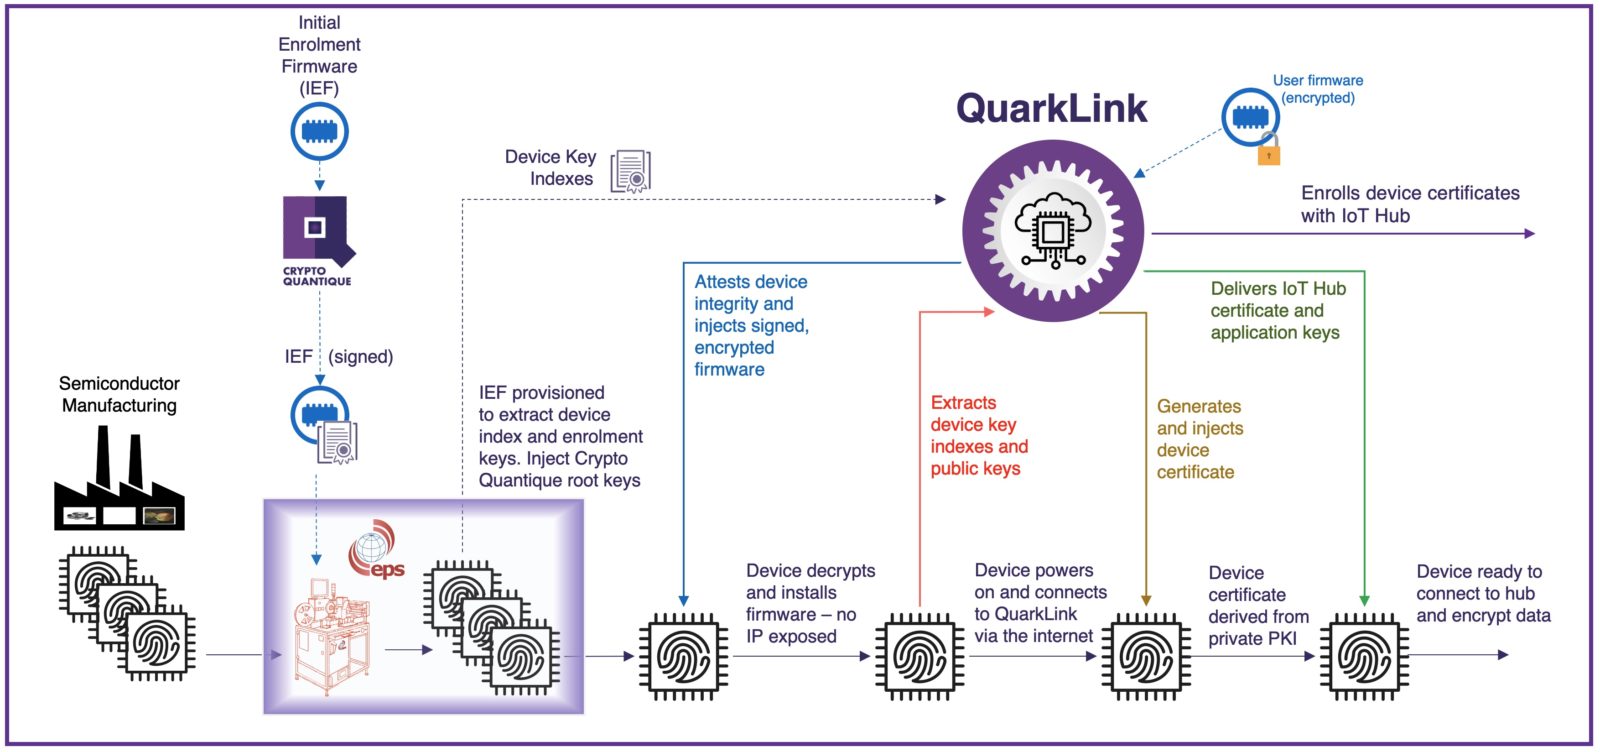 The flow of scalable IoT security enabled by EPS Global and Crypto Quantique